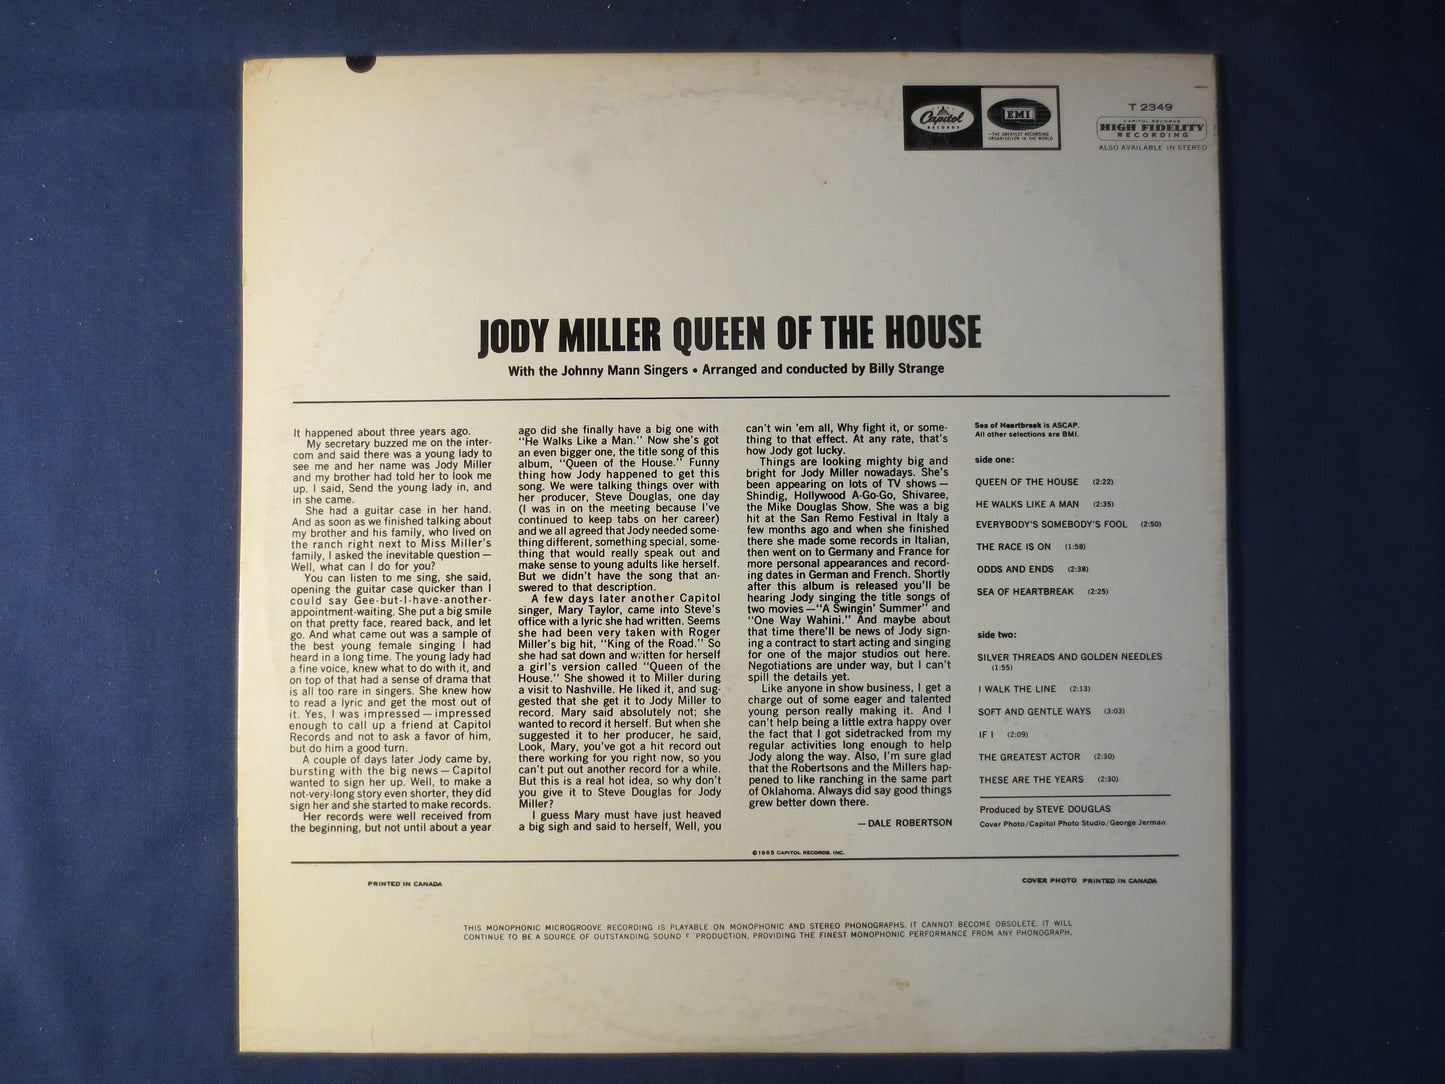 JODY MILLER, QUEEN of the House, Country Records, Jody Miller Record, Jody Miller Album, Jody Miller Lp, Lp, 1965 Records